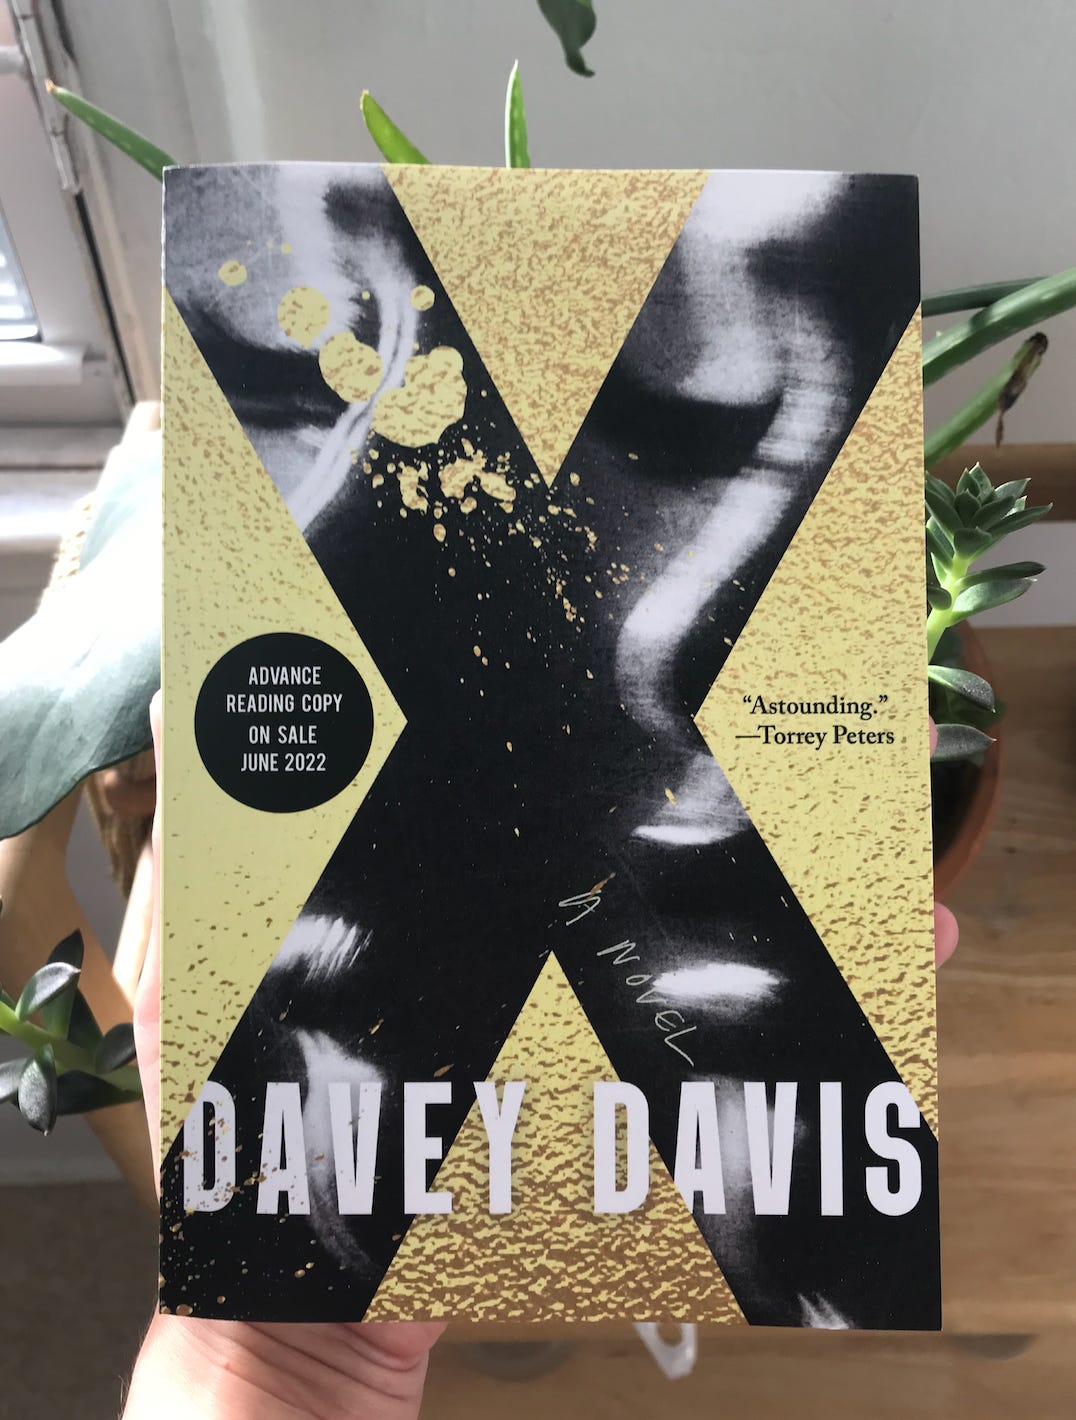 X, by Davey Davis, now available for preorder through Catapult Books